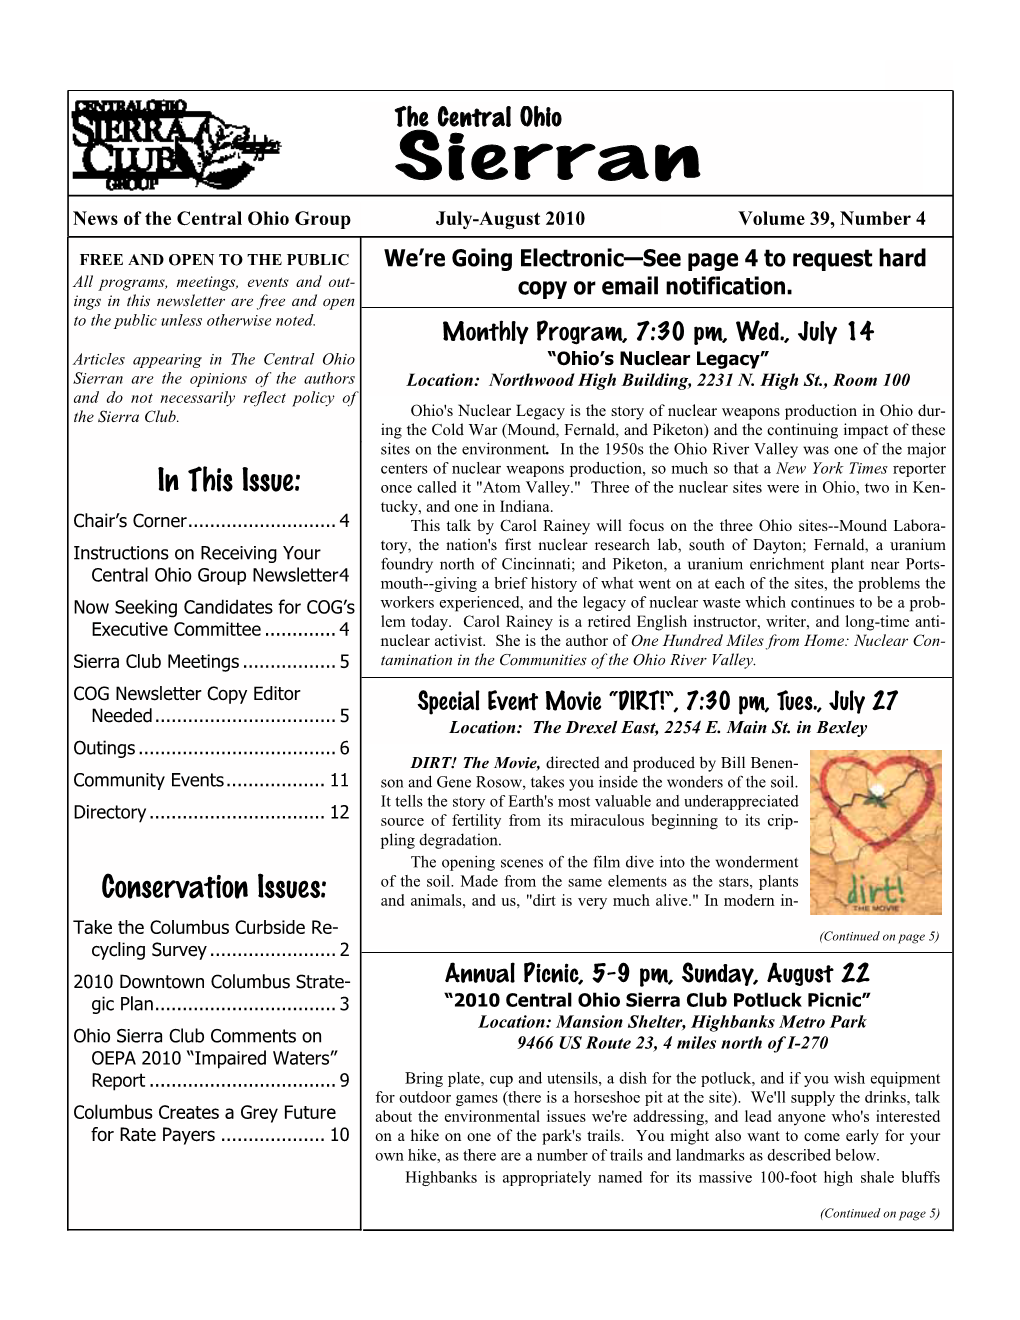 Sierran News of the Central Ohio Group July-August 2010 Volume 39, Number 4